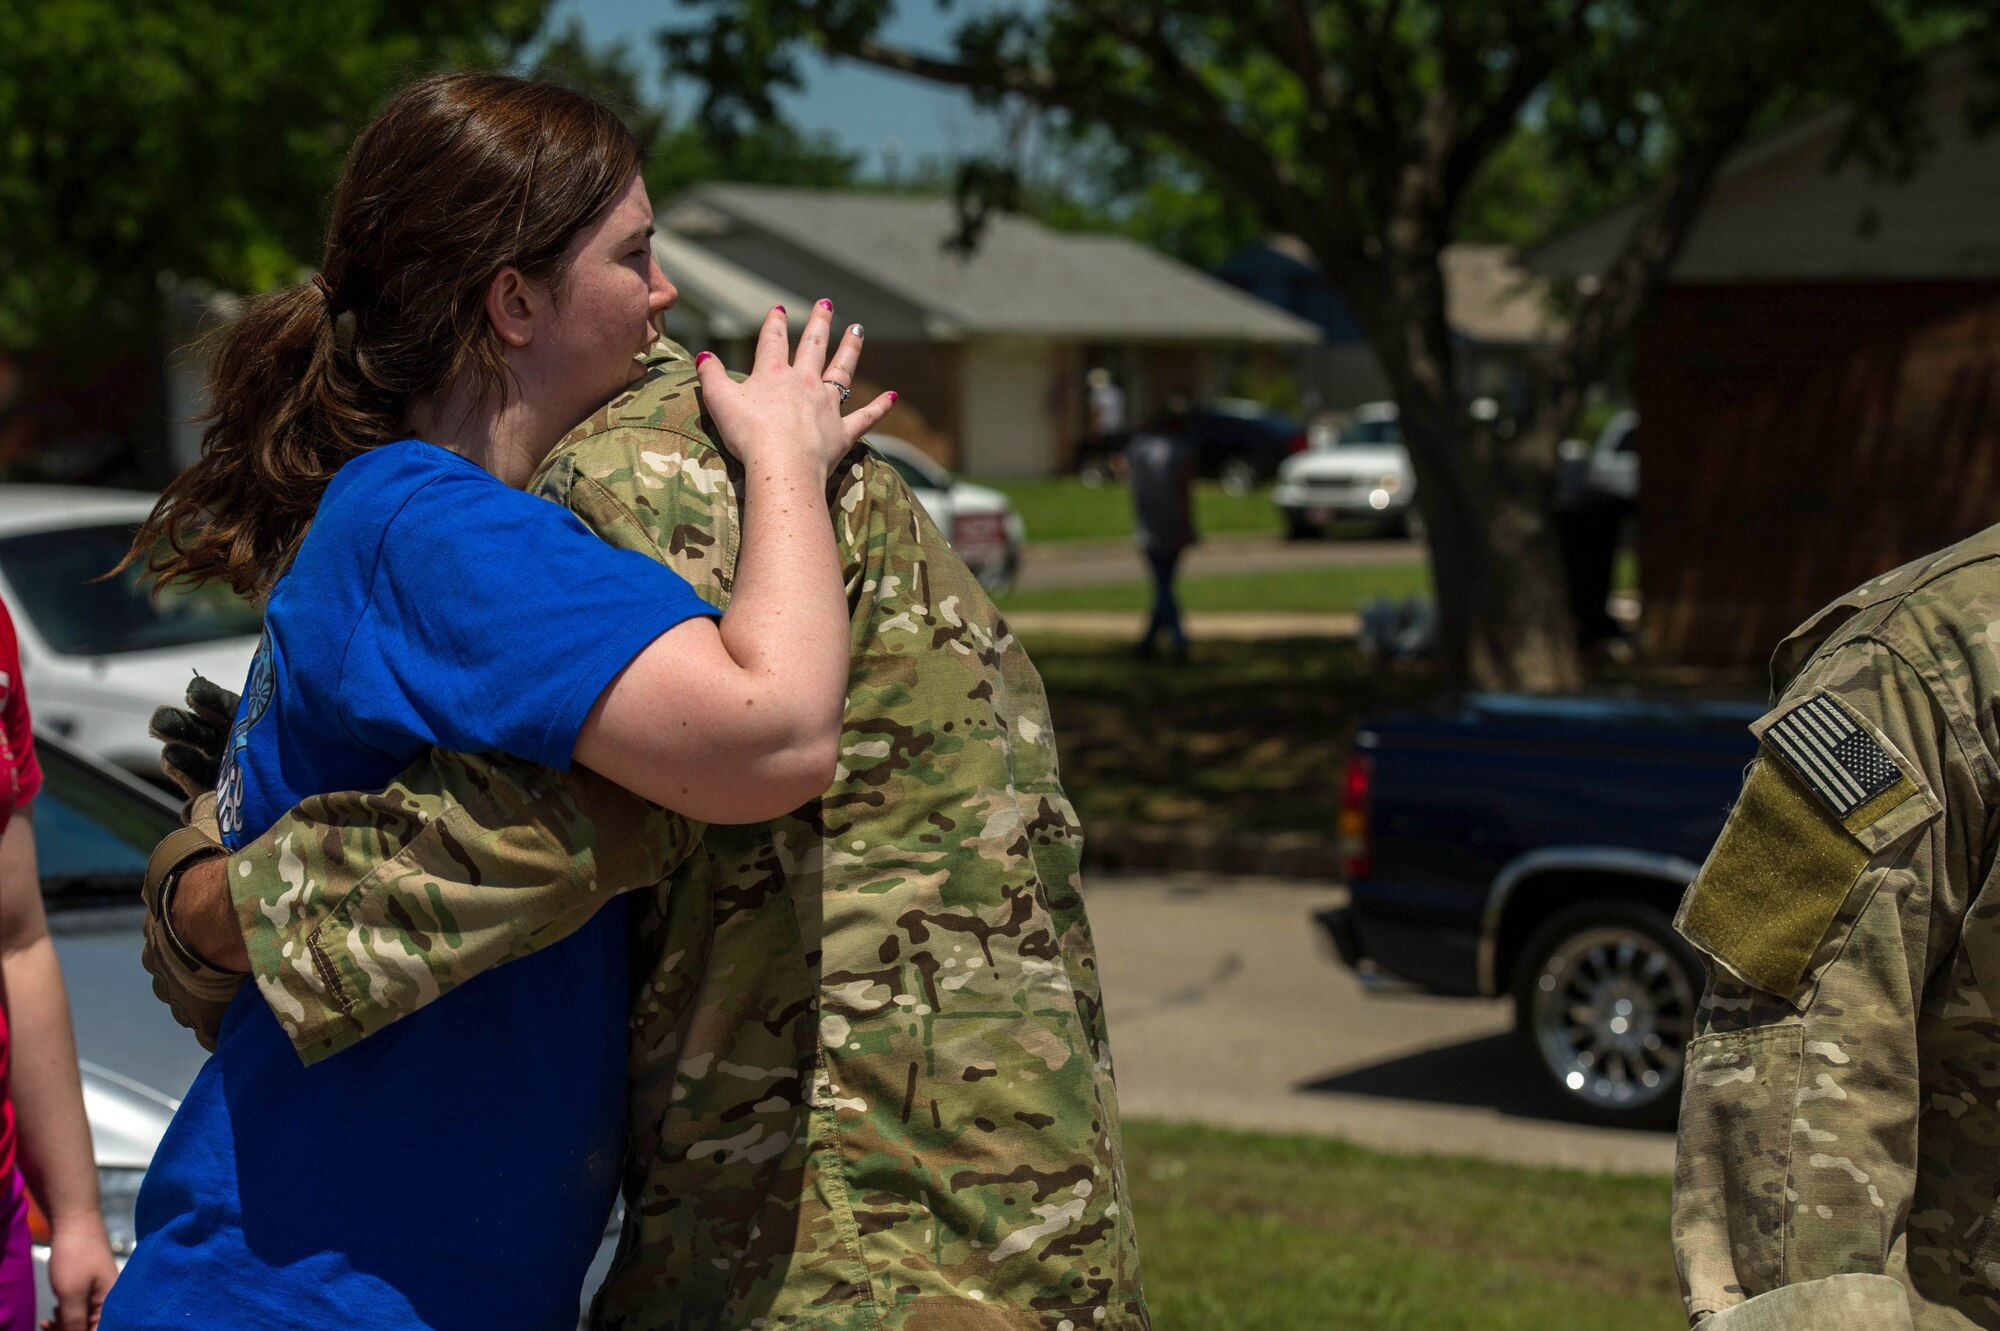 Alyson Tinney expresses her appreciation to Capt. Van Blaylock for helping her May 22, 2013, in Moore, Okla. An EF-5 tornado, with winds reaching at least 200 mph, traveled for 20 miles, leaving a two-mile-wide path of destruction, leveling homes, crushing vehicles, and killing more than 20 people May 20, 2013. More than 115 Oklahoma National Guard members have been activated to assist in the rescue and relief efforts. Blaylock is a joint terminal attack controller assigned to the 146th Air Support Operations Squadron. (U.S. Air Force photo/Staff Sgt. Jonathan Snyder) 